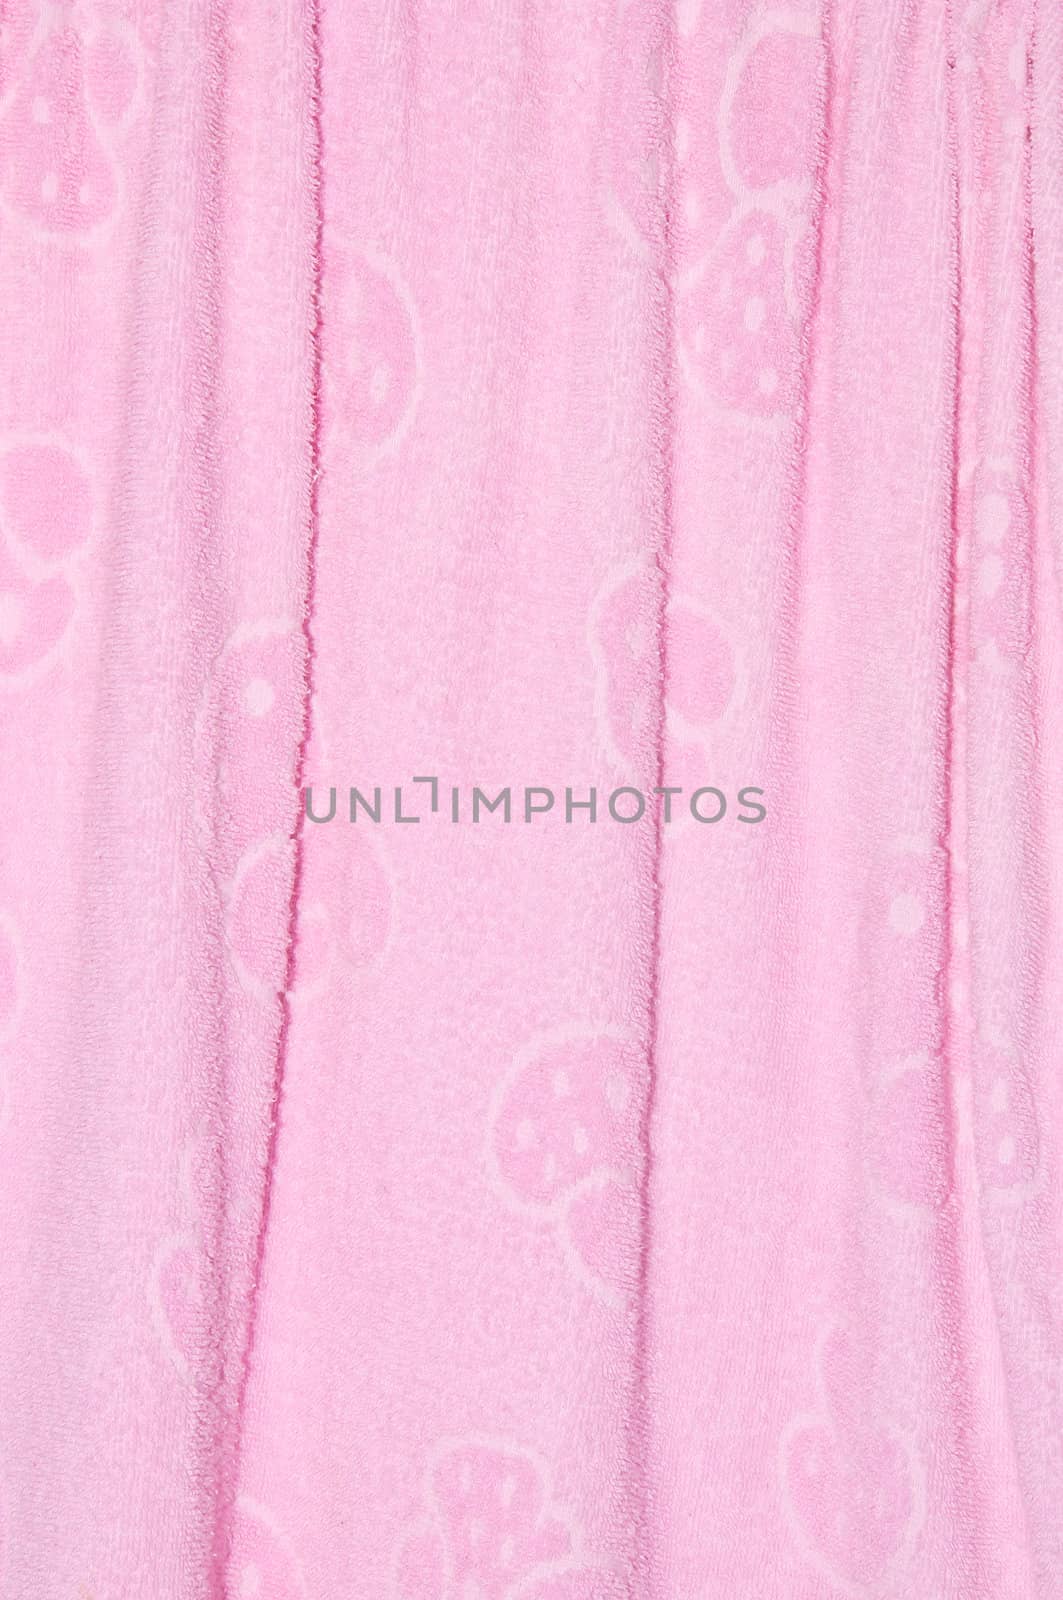 Pink curtains for decorative and background.